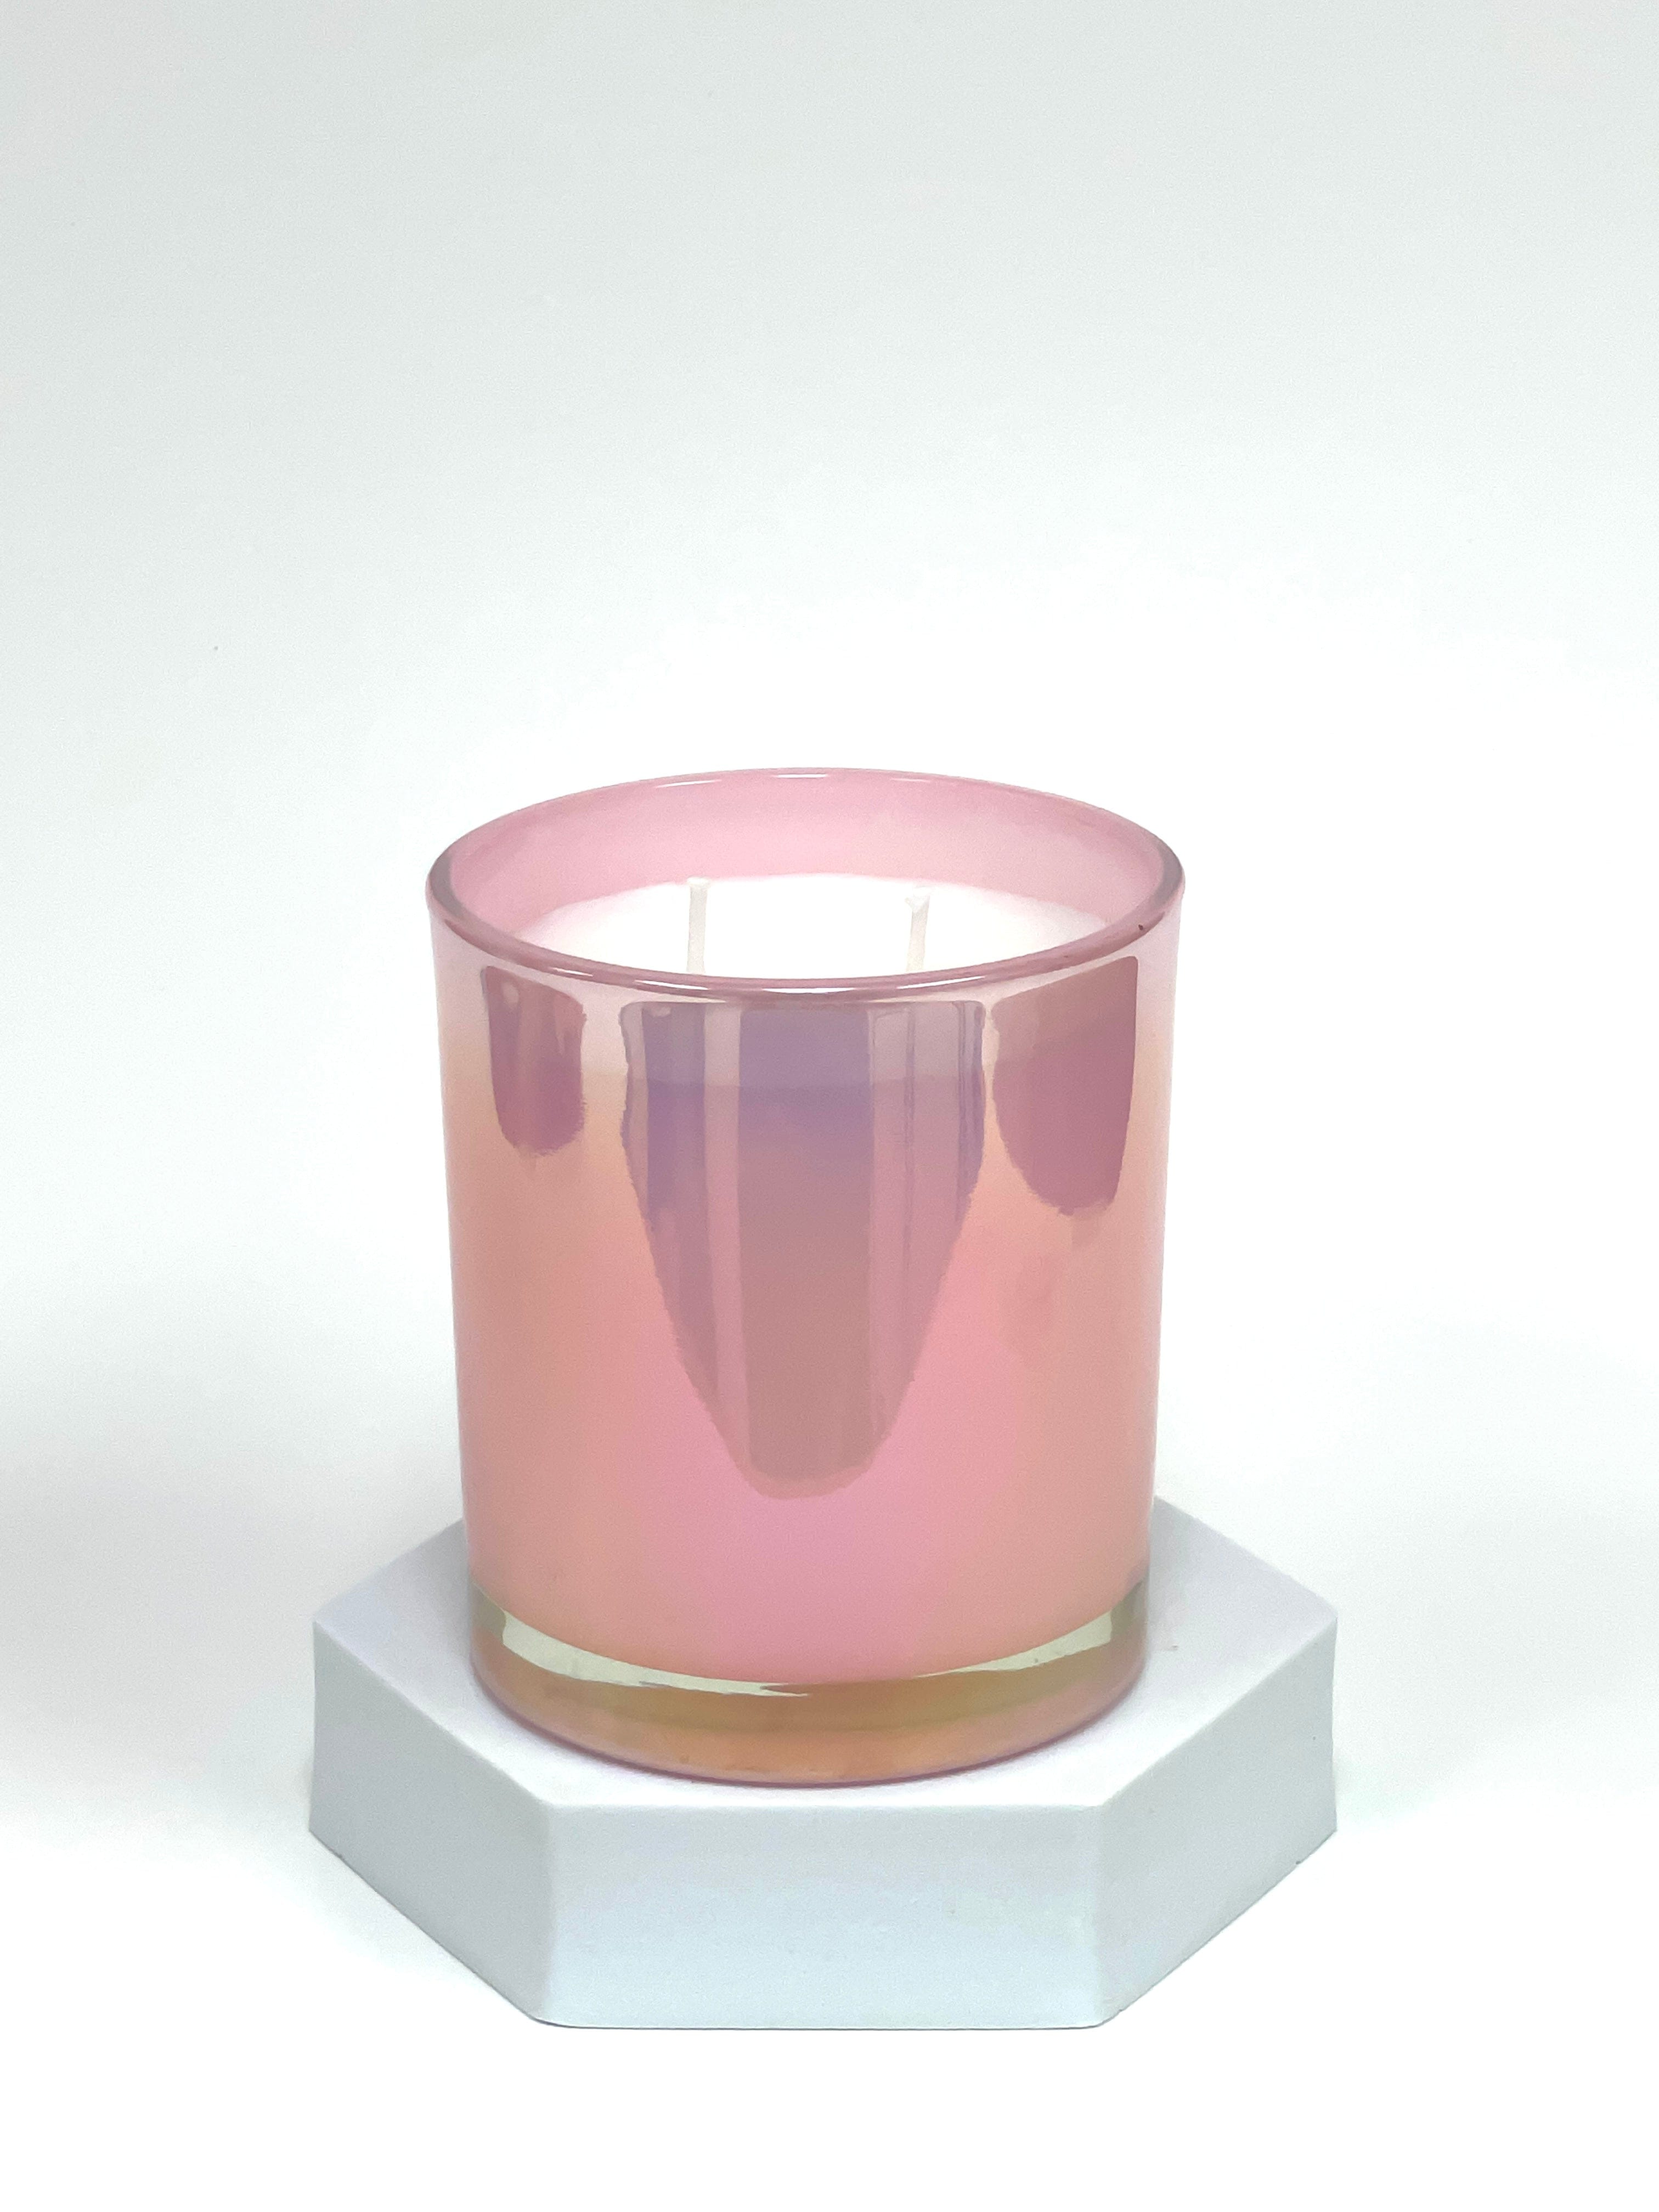 Velavida Candle Wholesale Iridescent Vessels Private Label Candles (12 Candles)